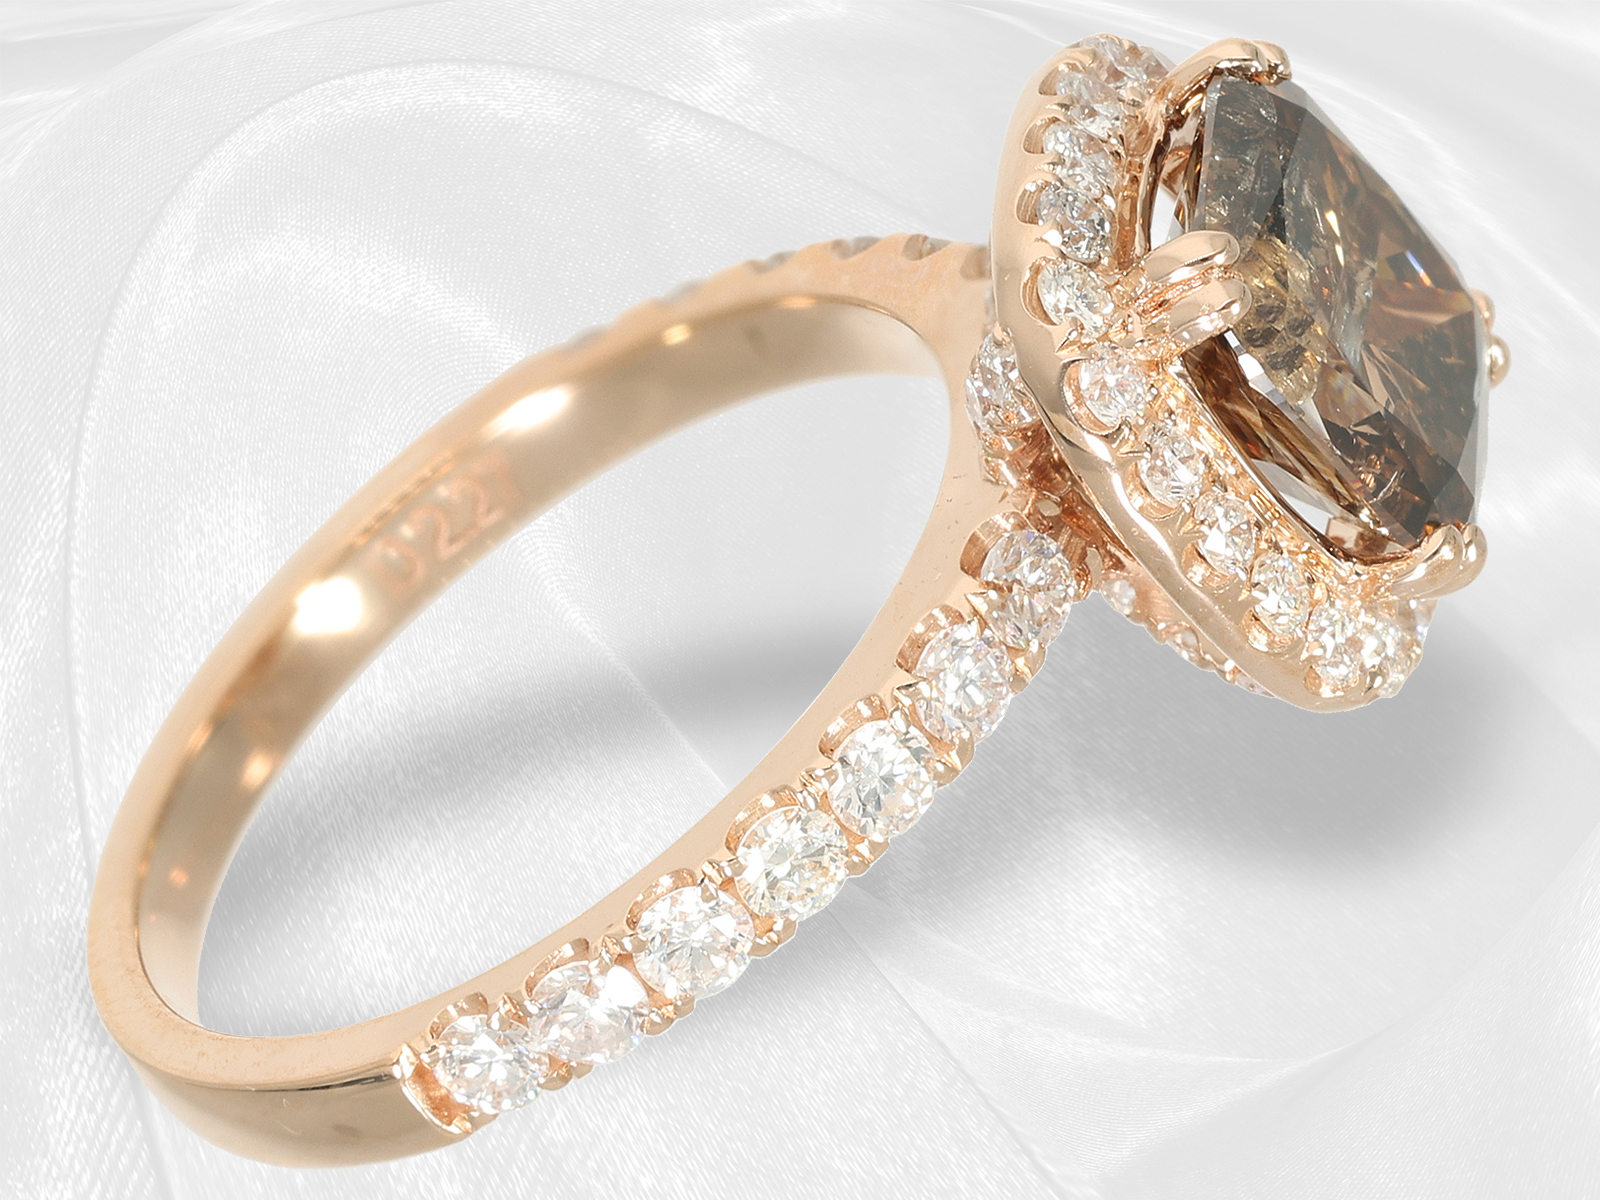 Interesting high carat pink gold ring with white and a fancy brilliant-cut diamond of 2.28ct, unworn - Image 2 of 7